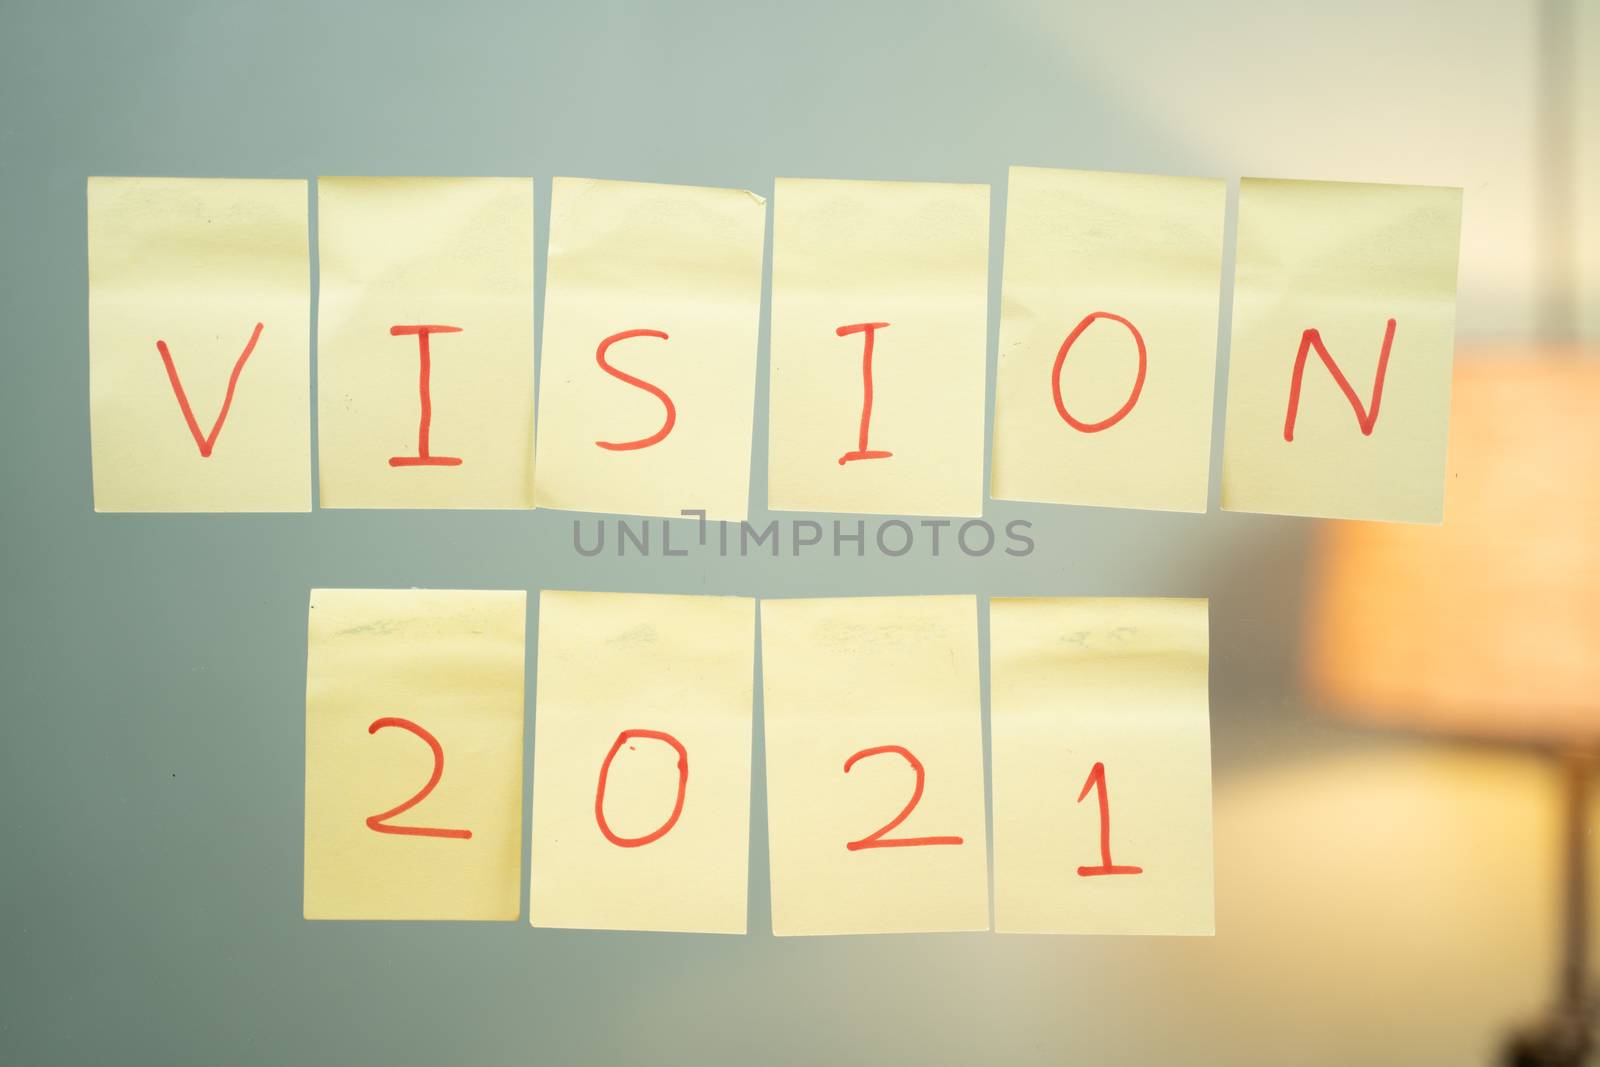 Pasted vision 2021 on wall - Concept for new year 2021 vision or business plan